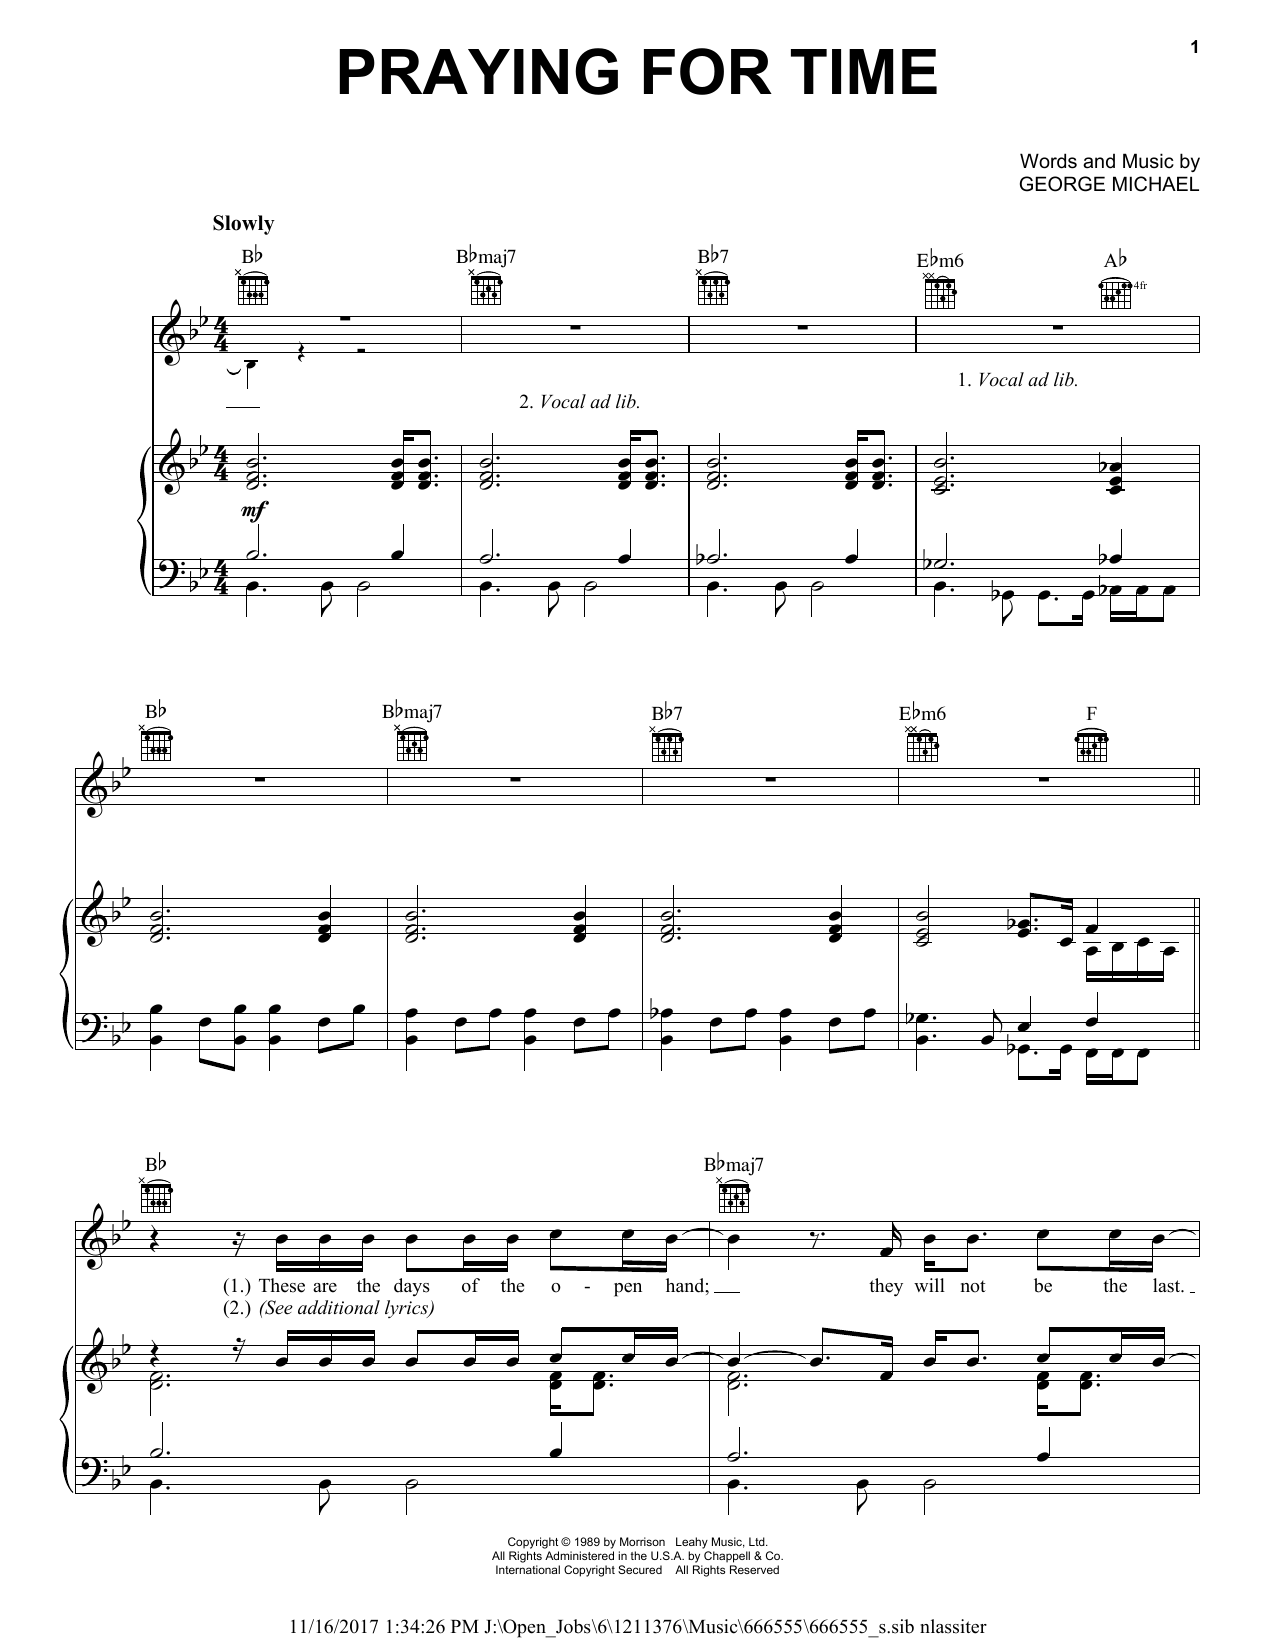 George Michael "Praying For Time" Sheet Music PDF Notes, Chords | Pop Score Piano, Vocal Guitar (Right-Hand Melody) Download Printable. SKU: